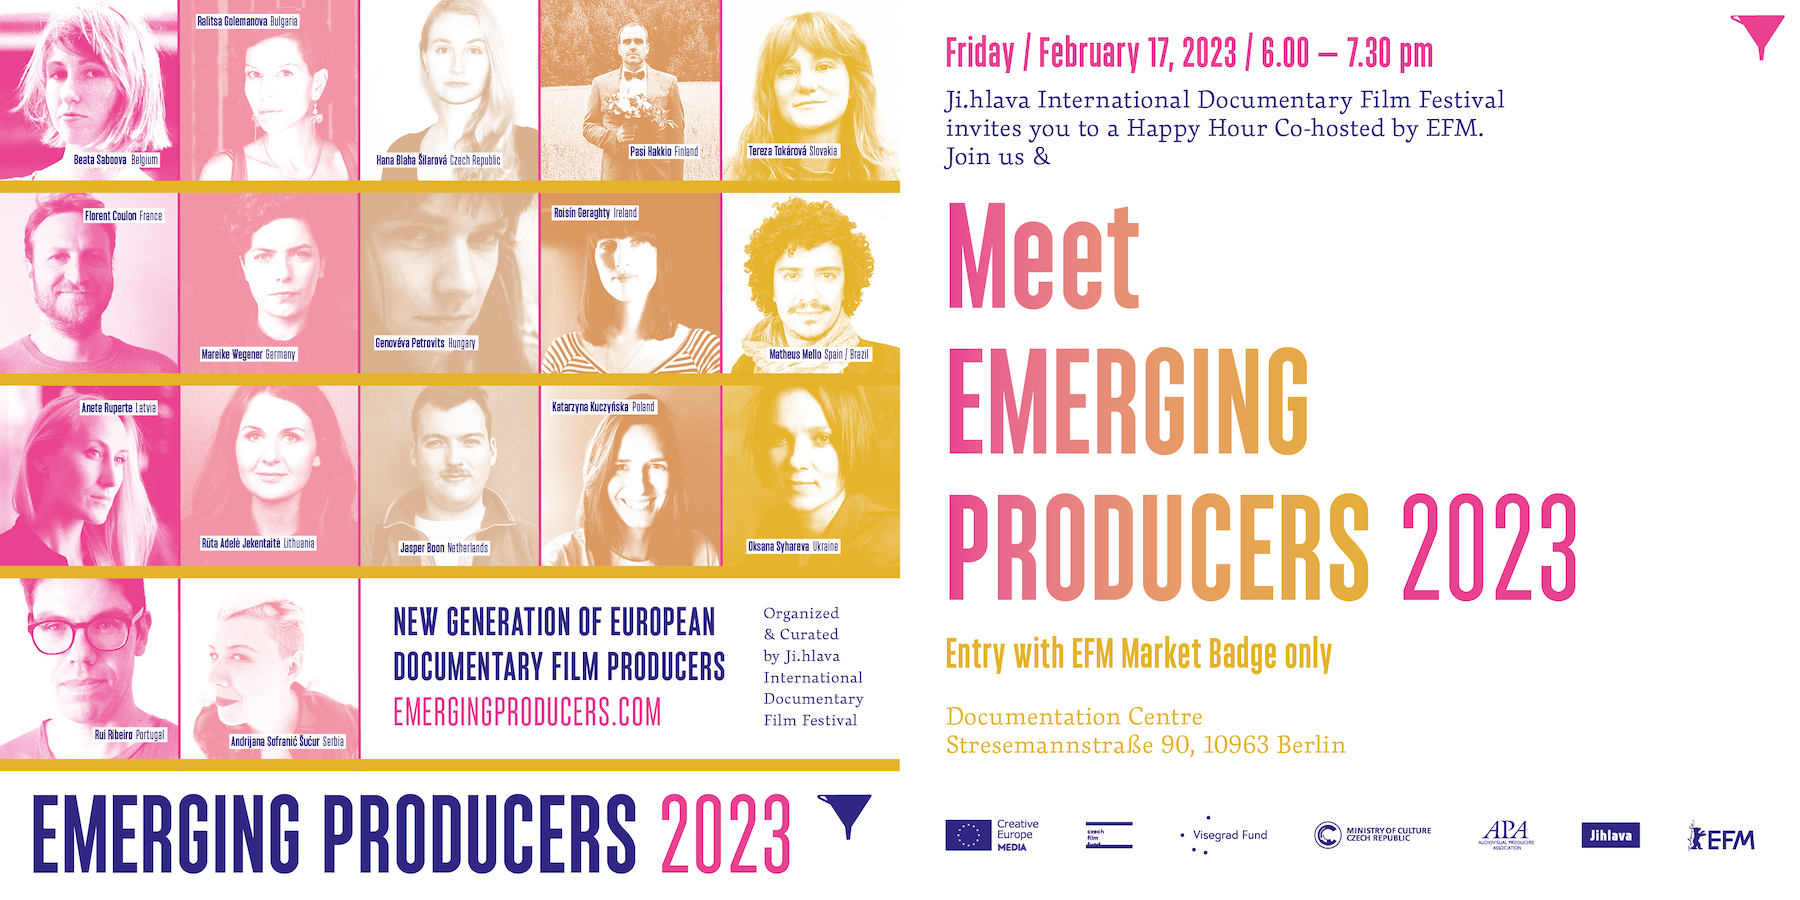 Emerging producers 2023